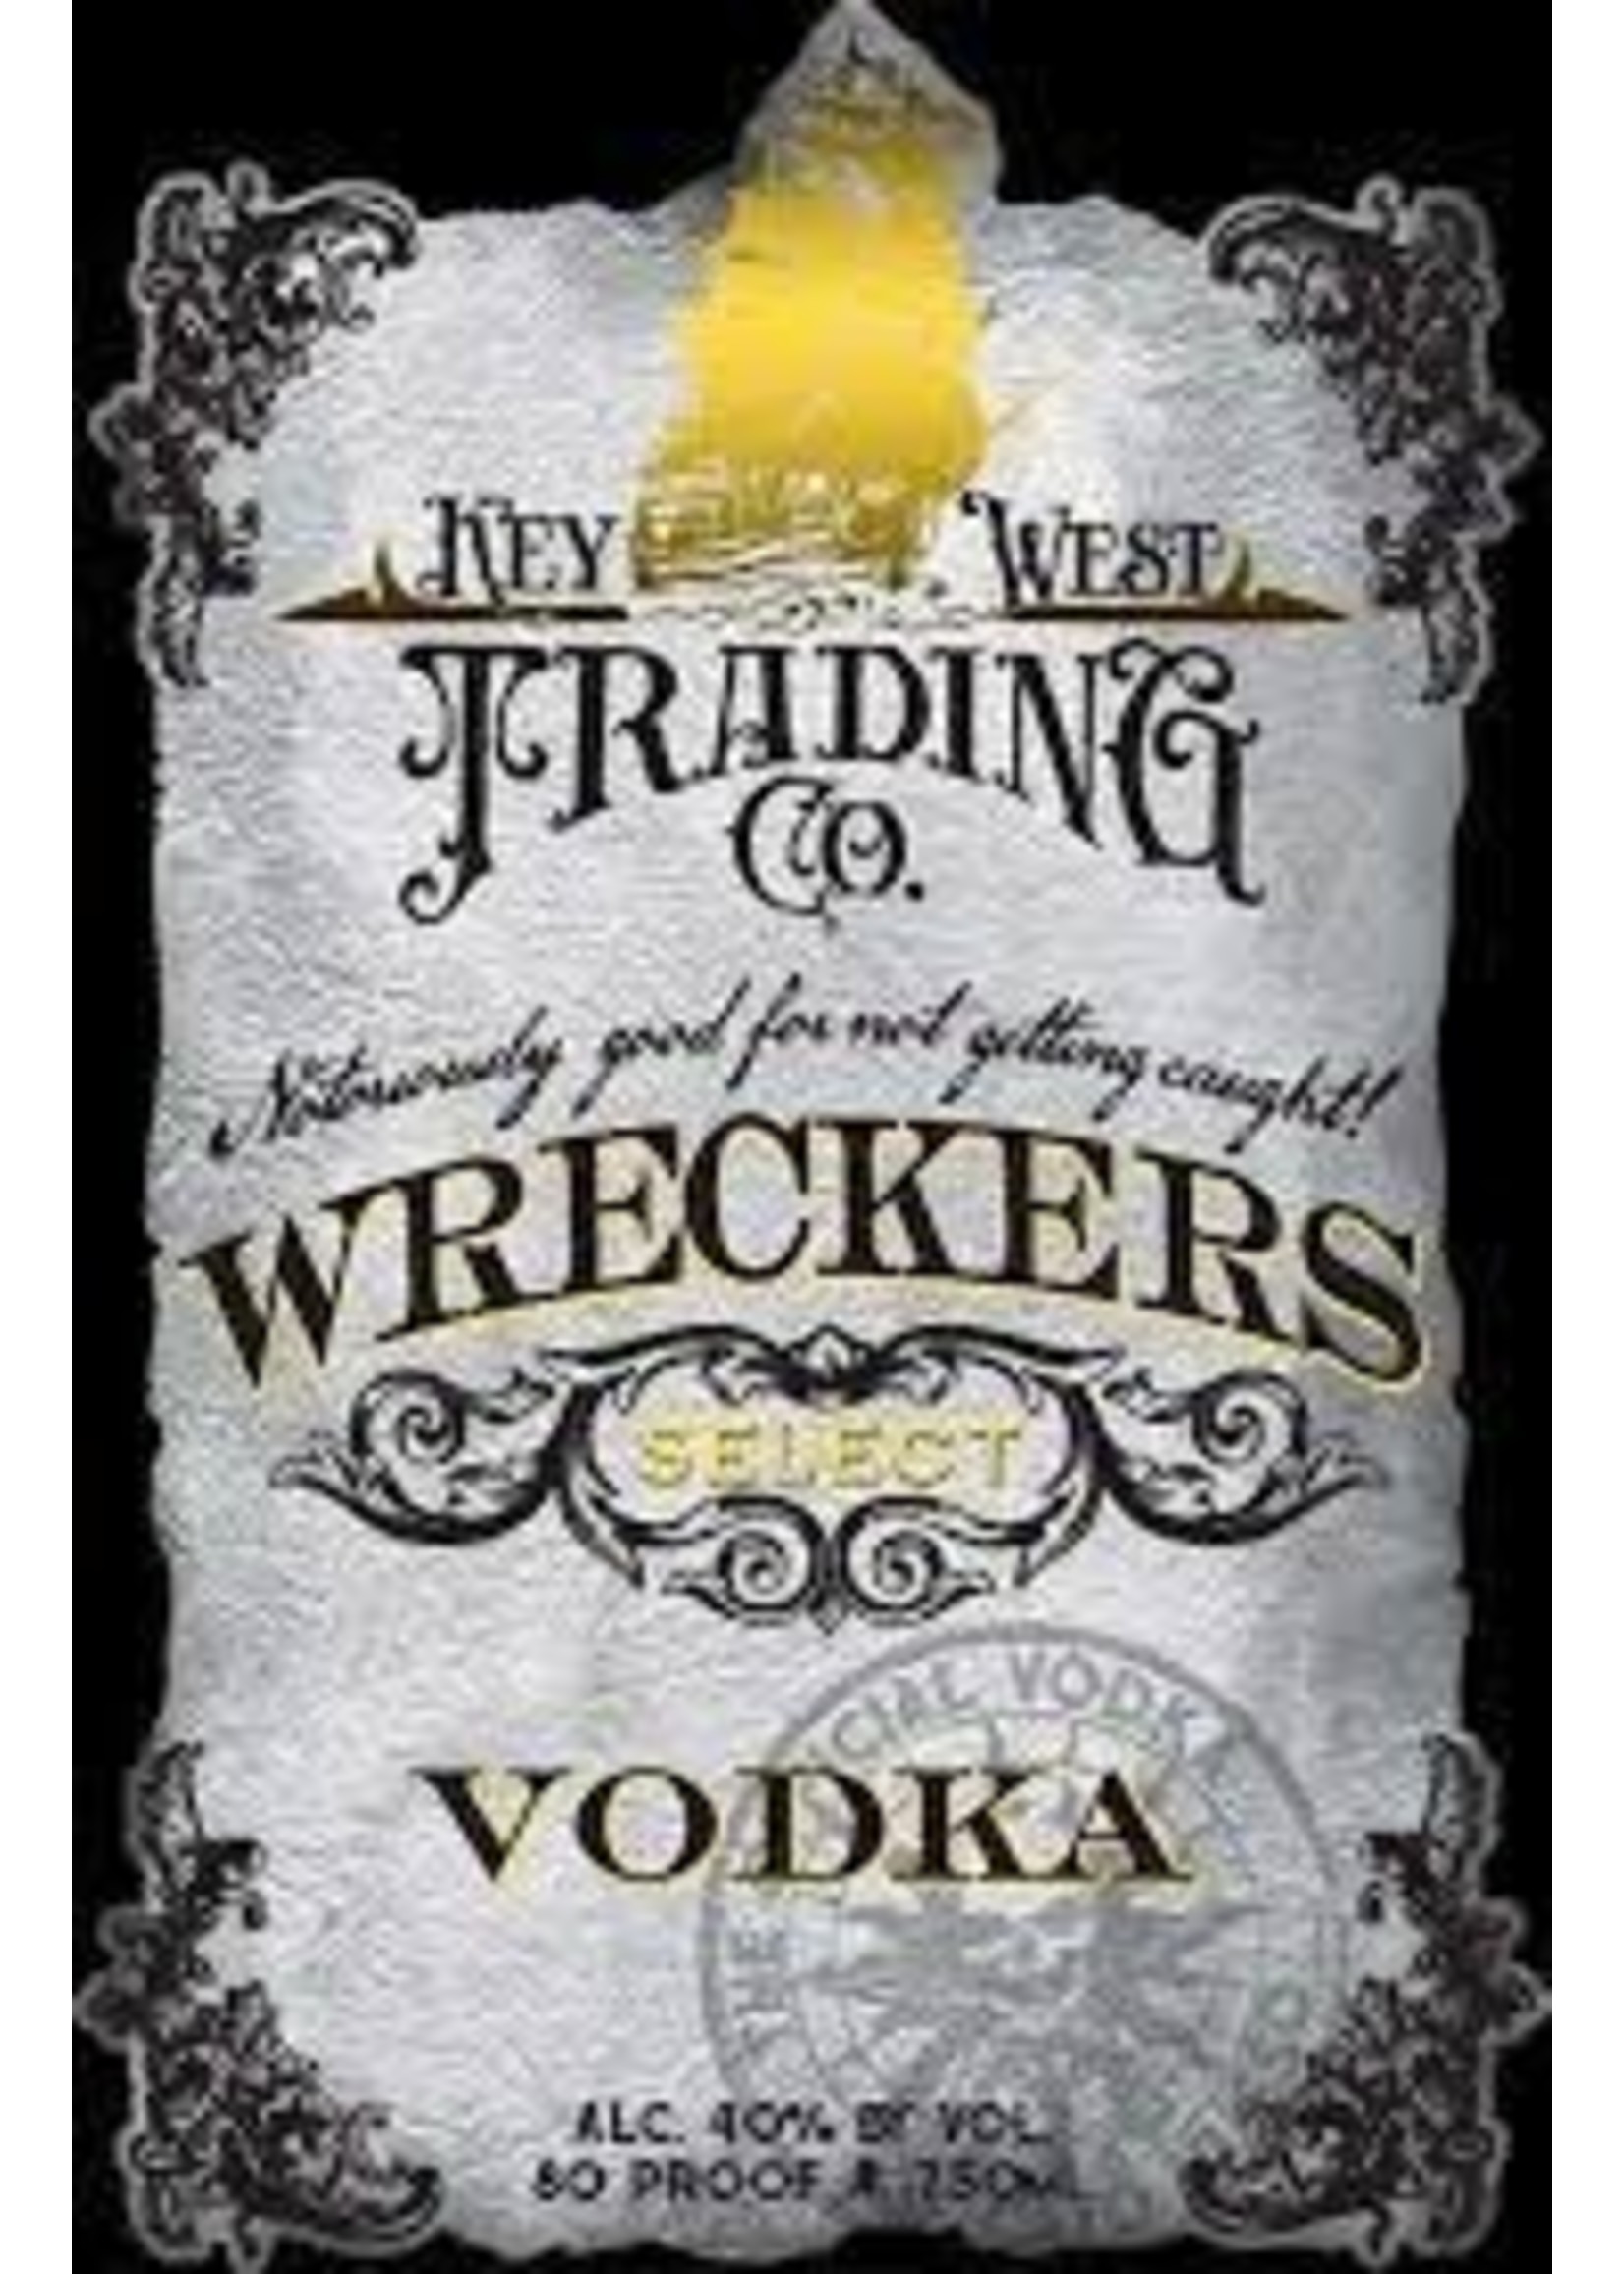 KEY WEST TRADING CO. KEY WEST TRADING CO.	WRECKERS VOKDA	 .375L